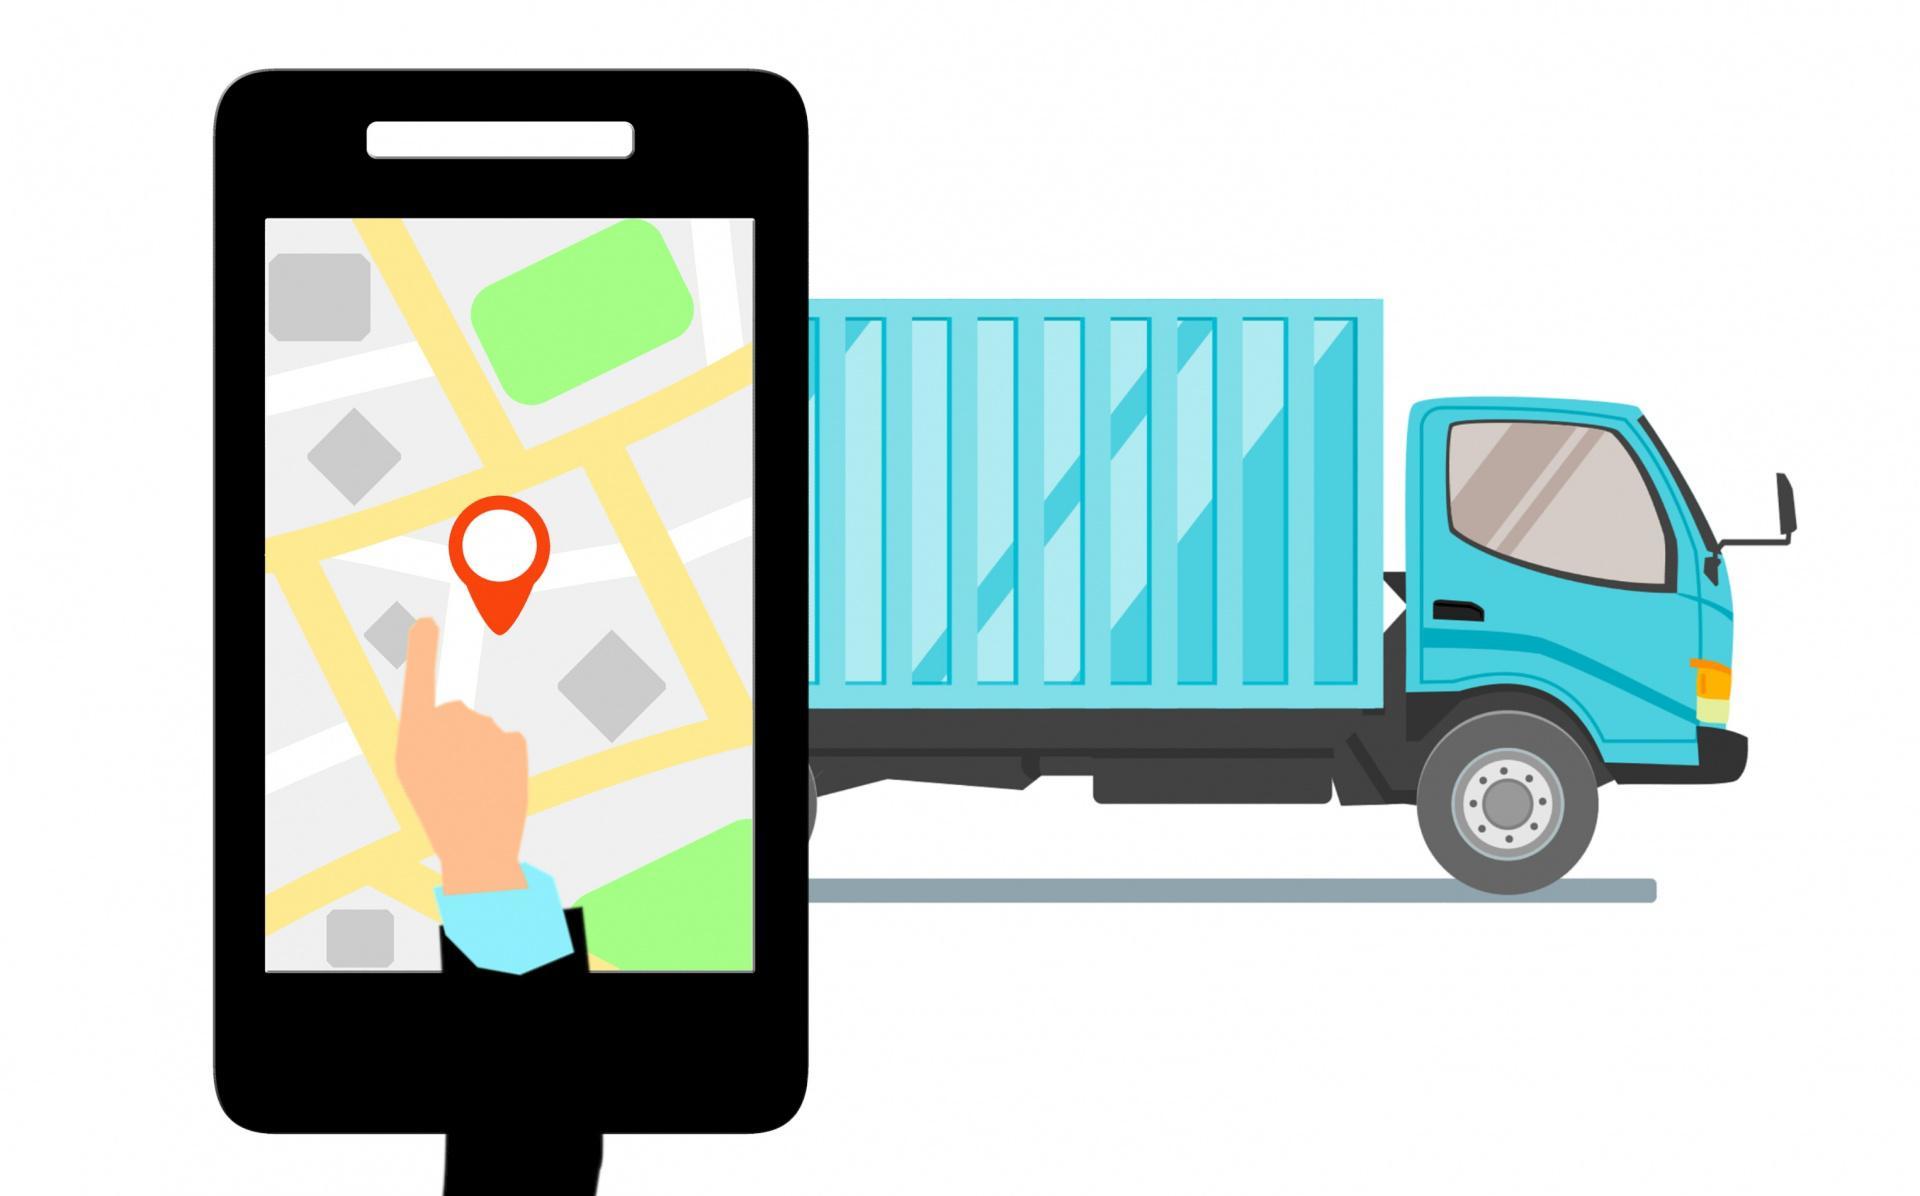 A cartoon image of a forefinger on a mobile phone points at a location on a map, with a blue van behind